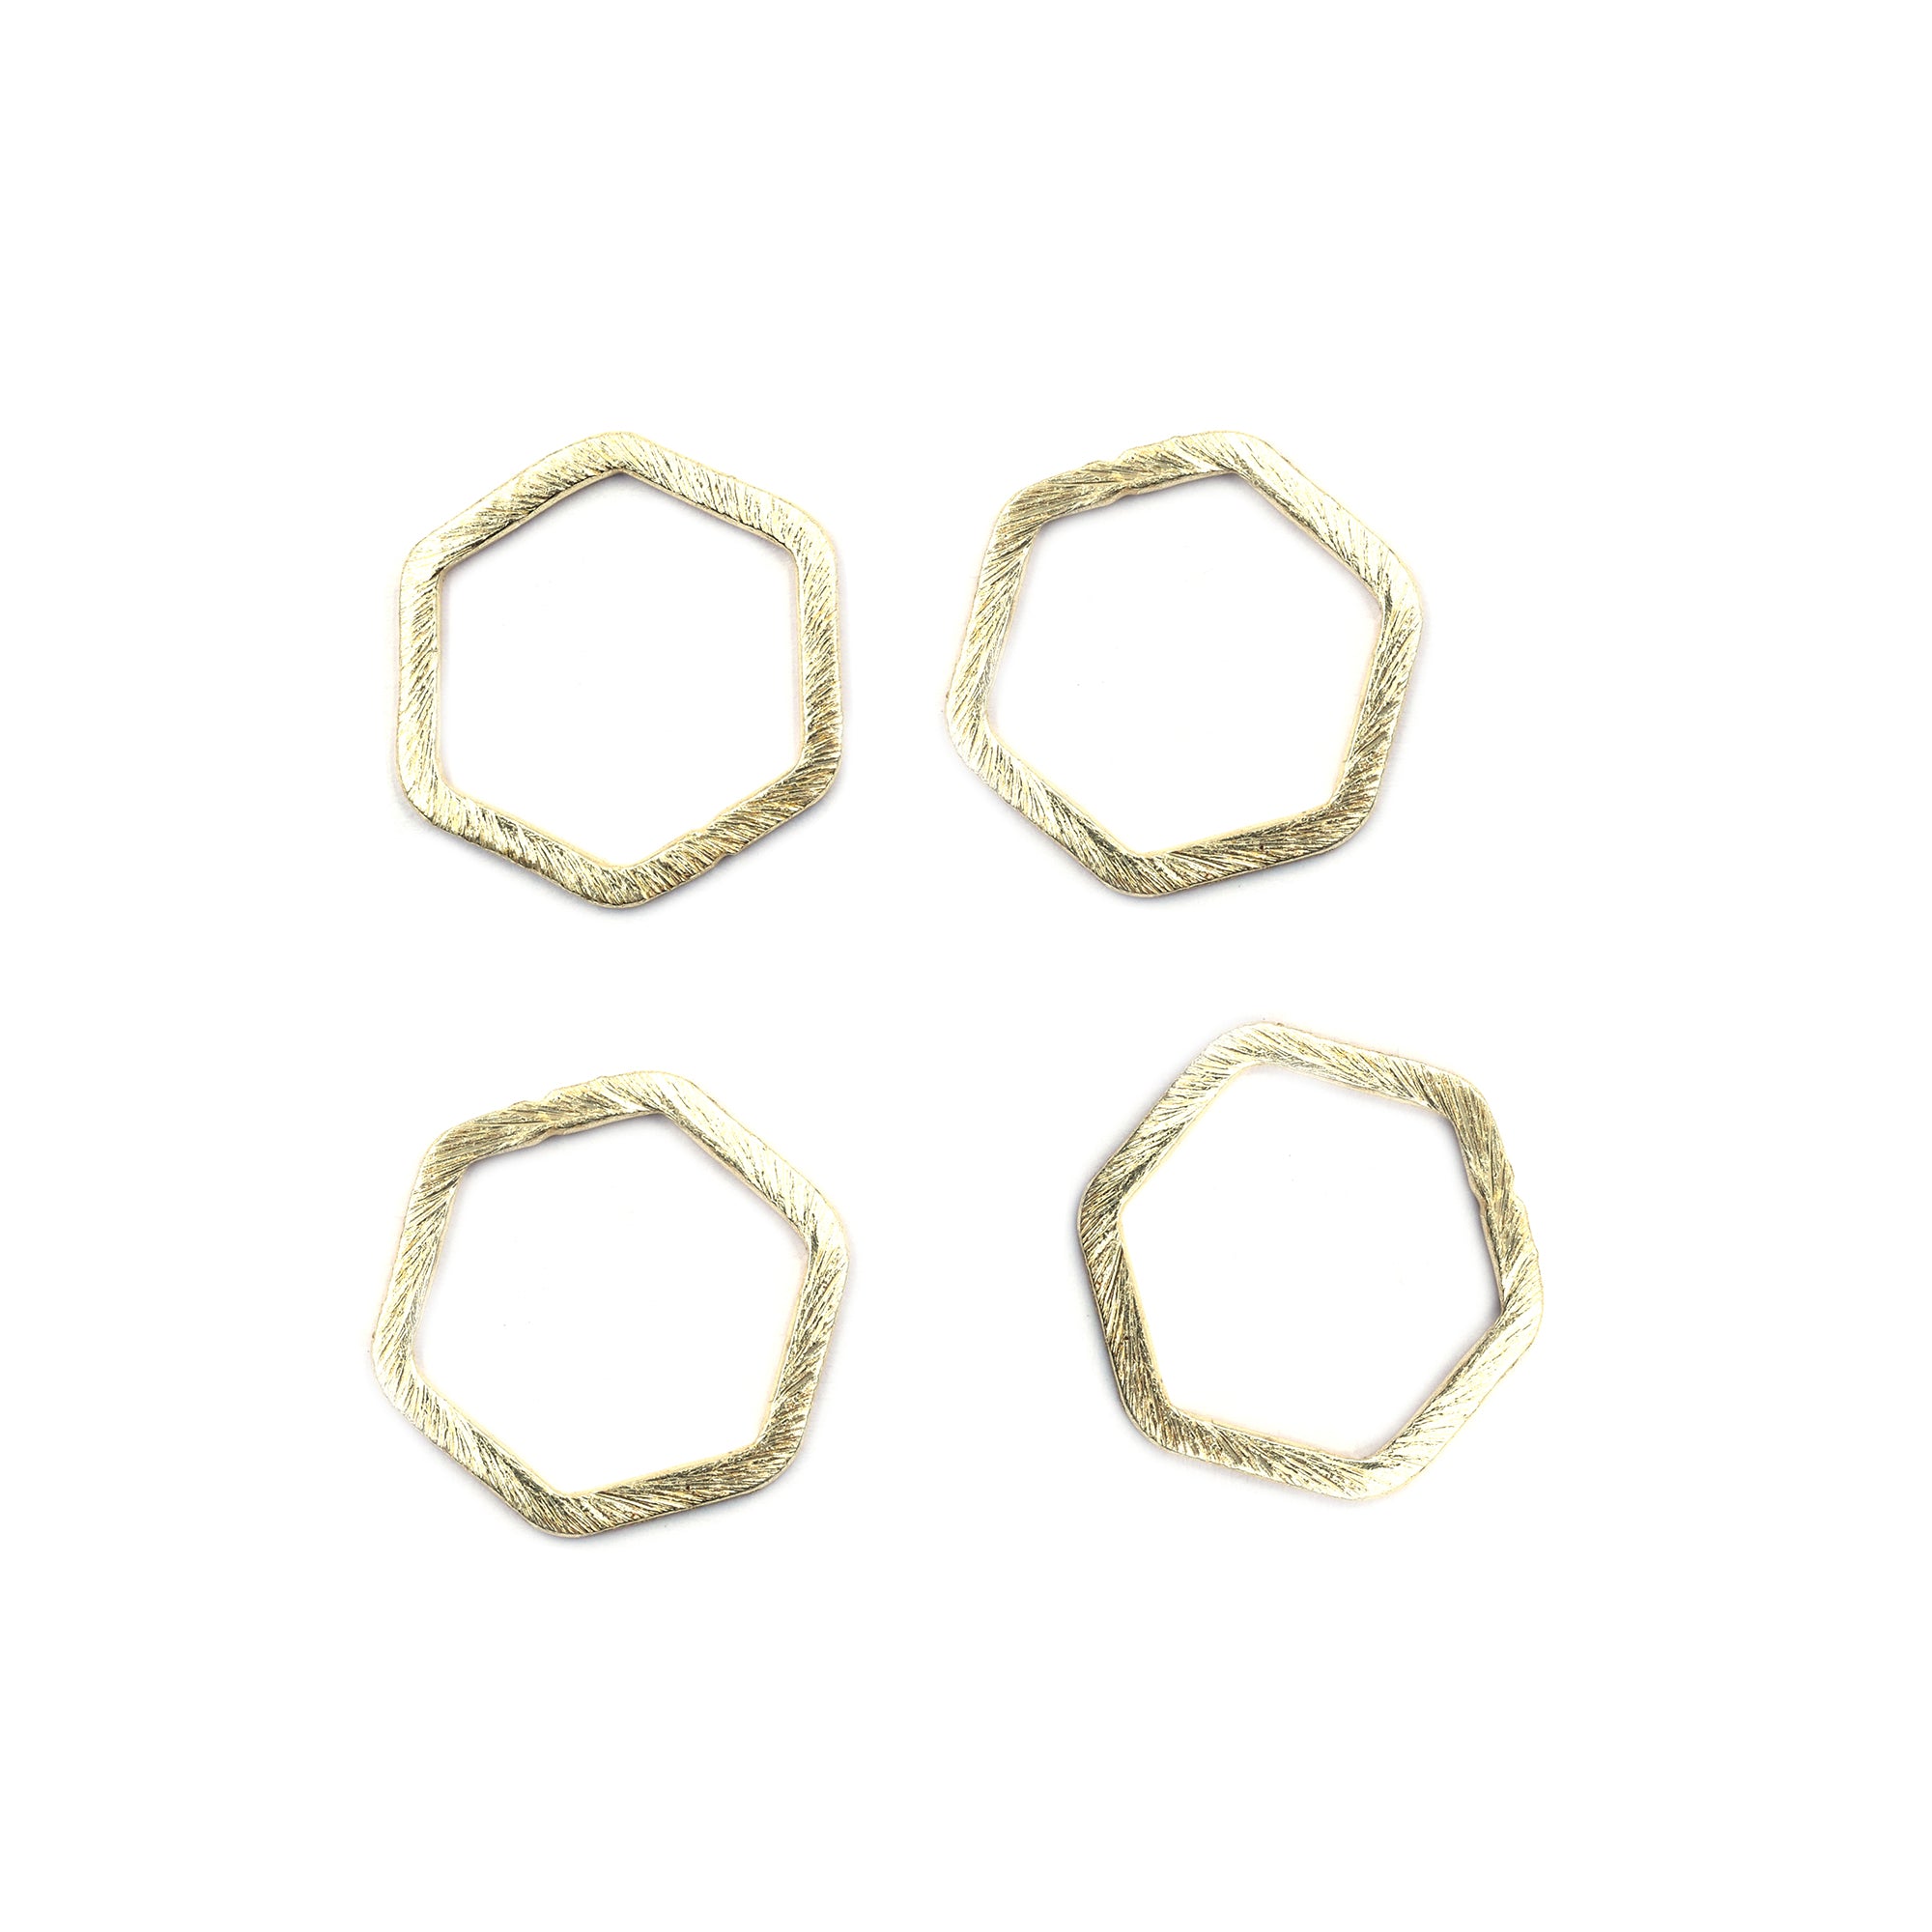 20 Pcs 20mm Hexagon Brushed Matte Finish Connector Closed Ring Hoop Gold Plated Copper